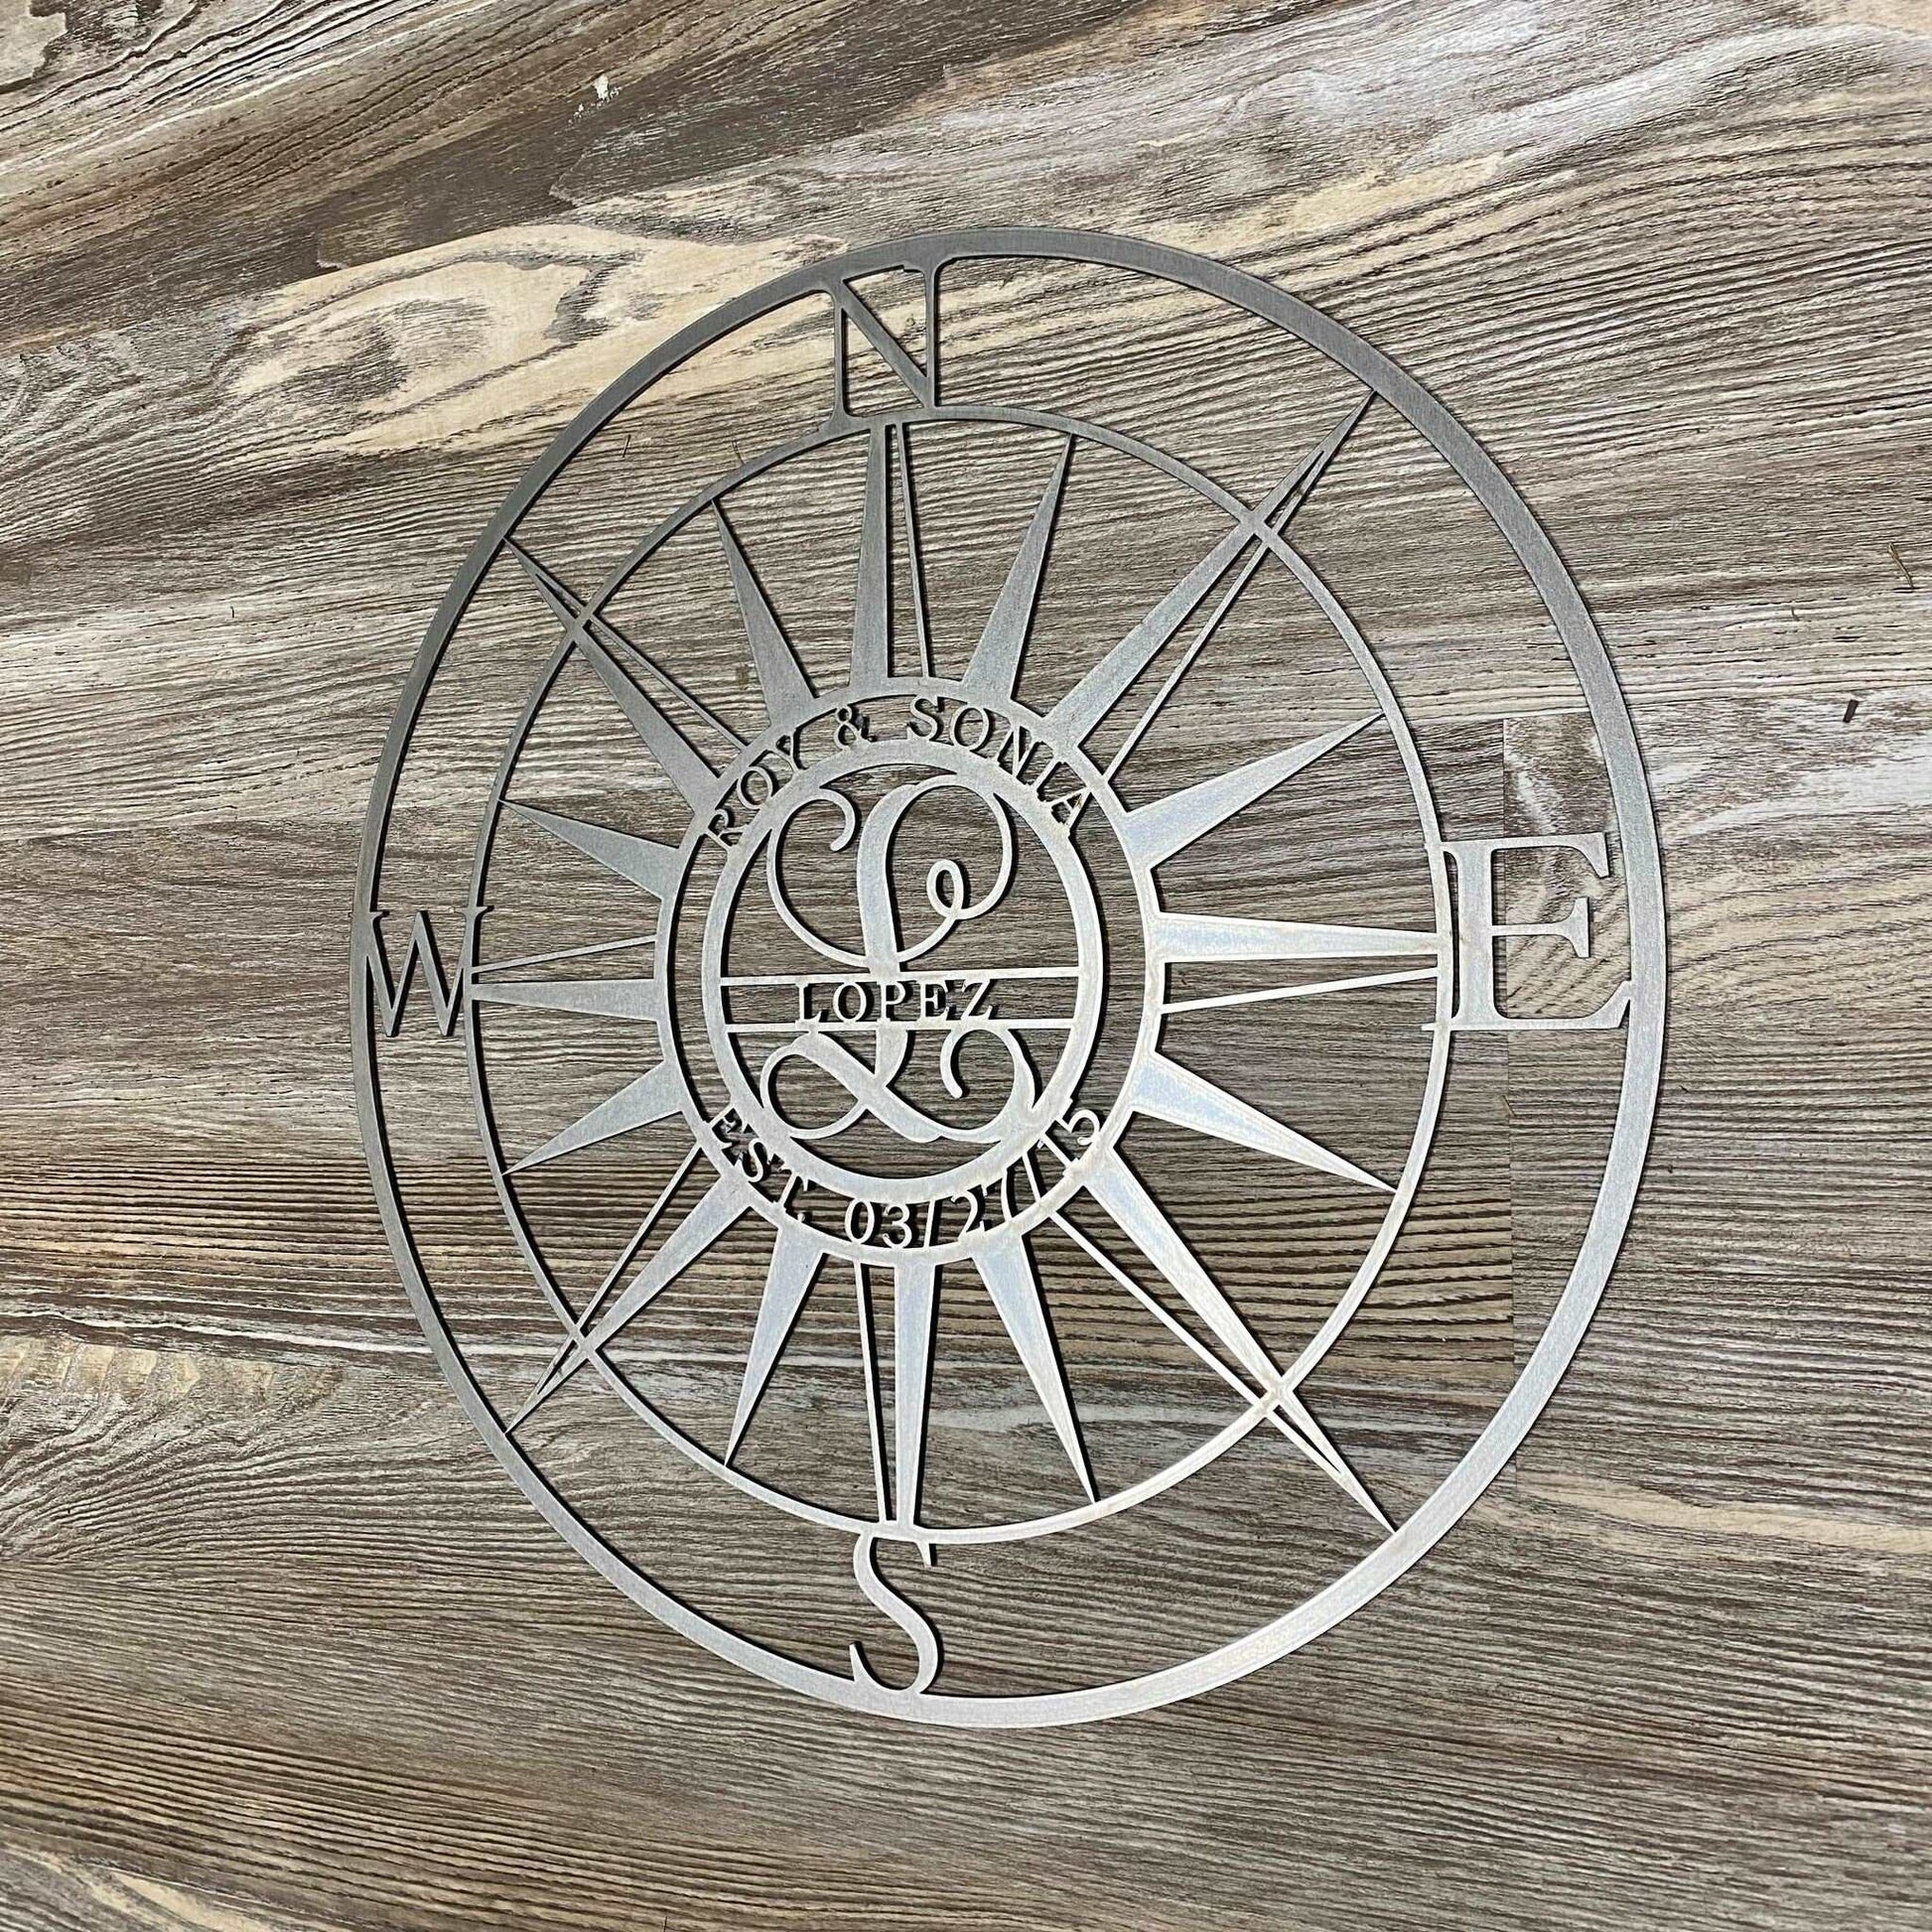 Nautical Monogram Split Name  Compass Outdoor Wall Art - Available up to 47"  House Sensations Art   